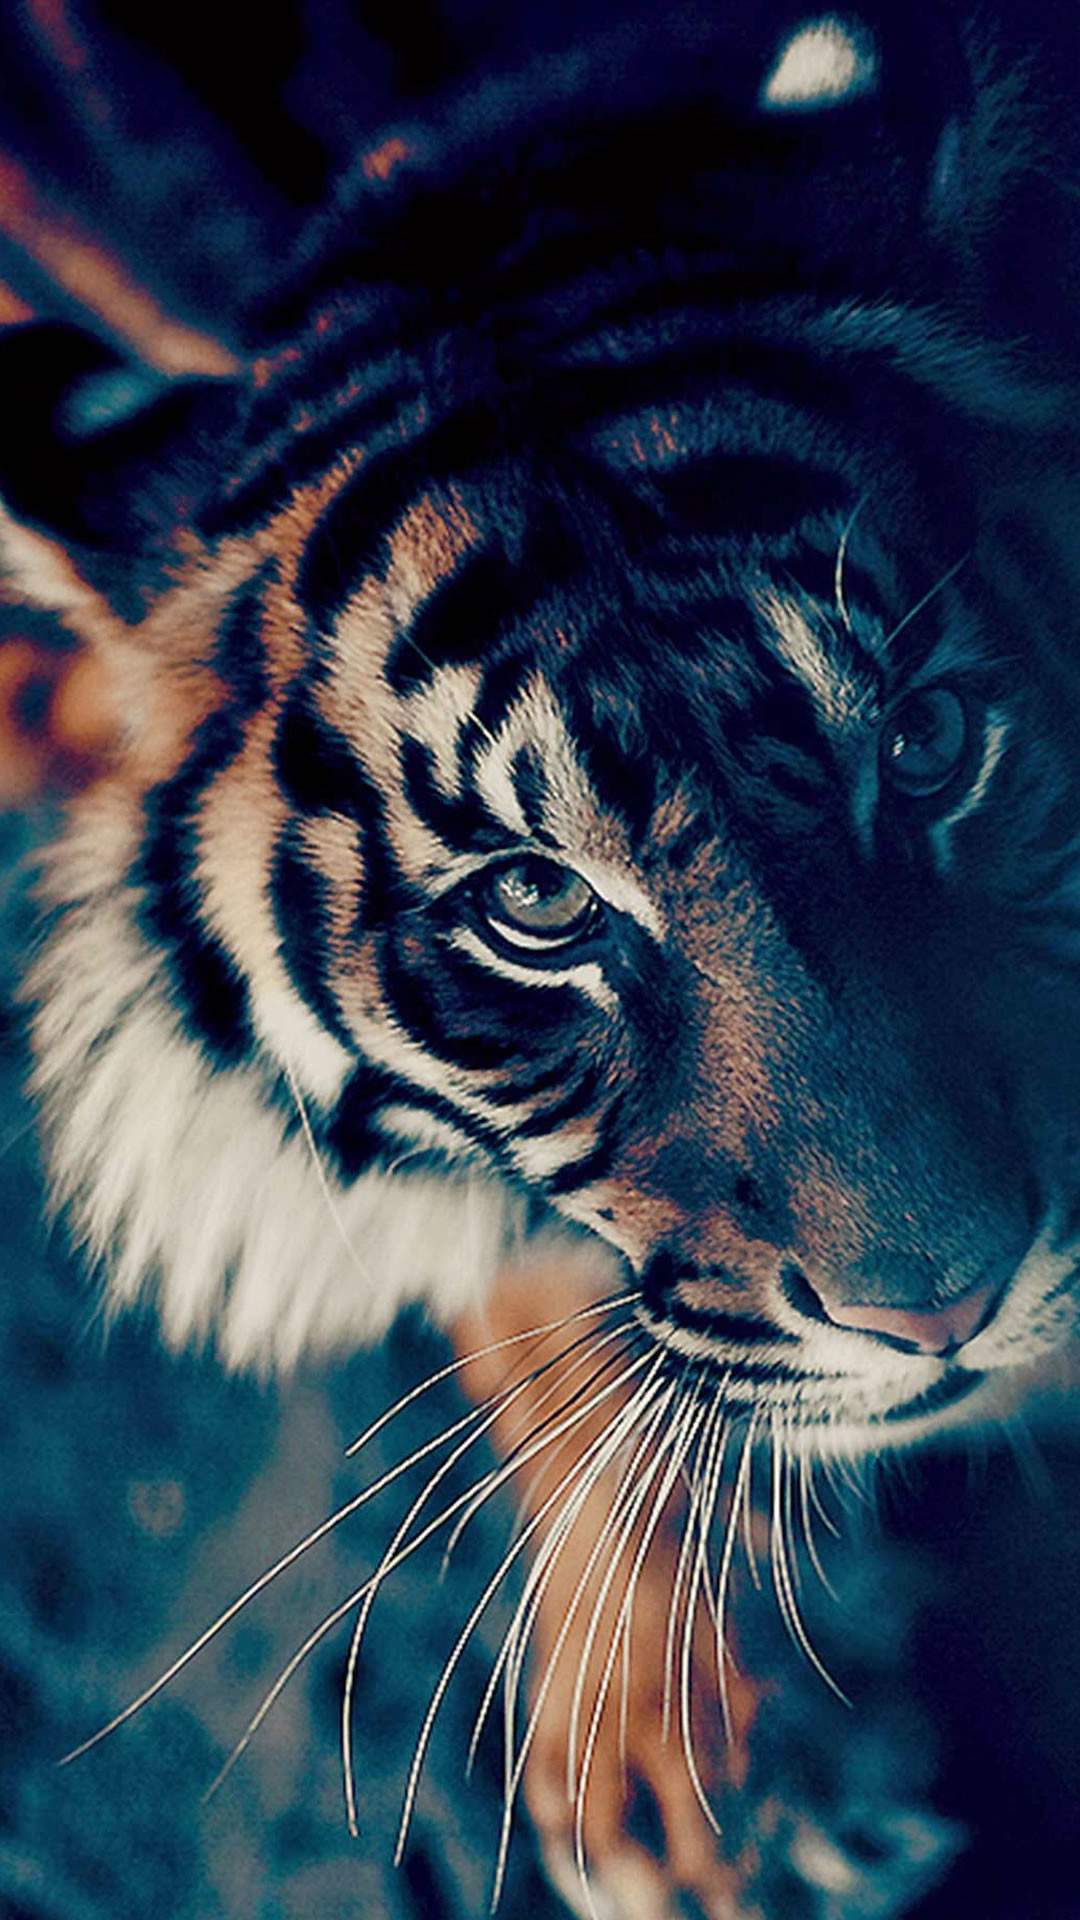 Cool Wallpapers of Tigers 54 images